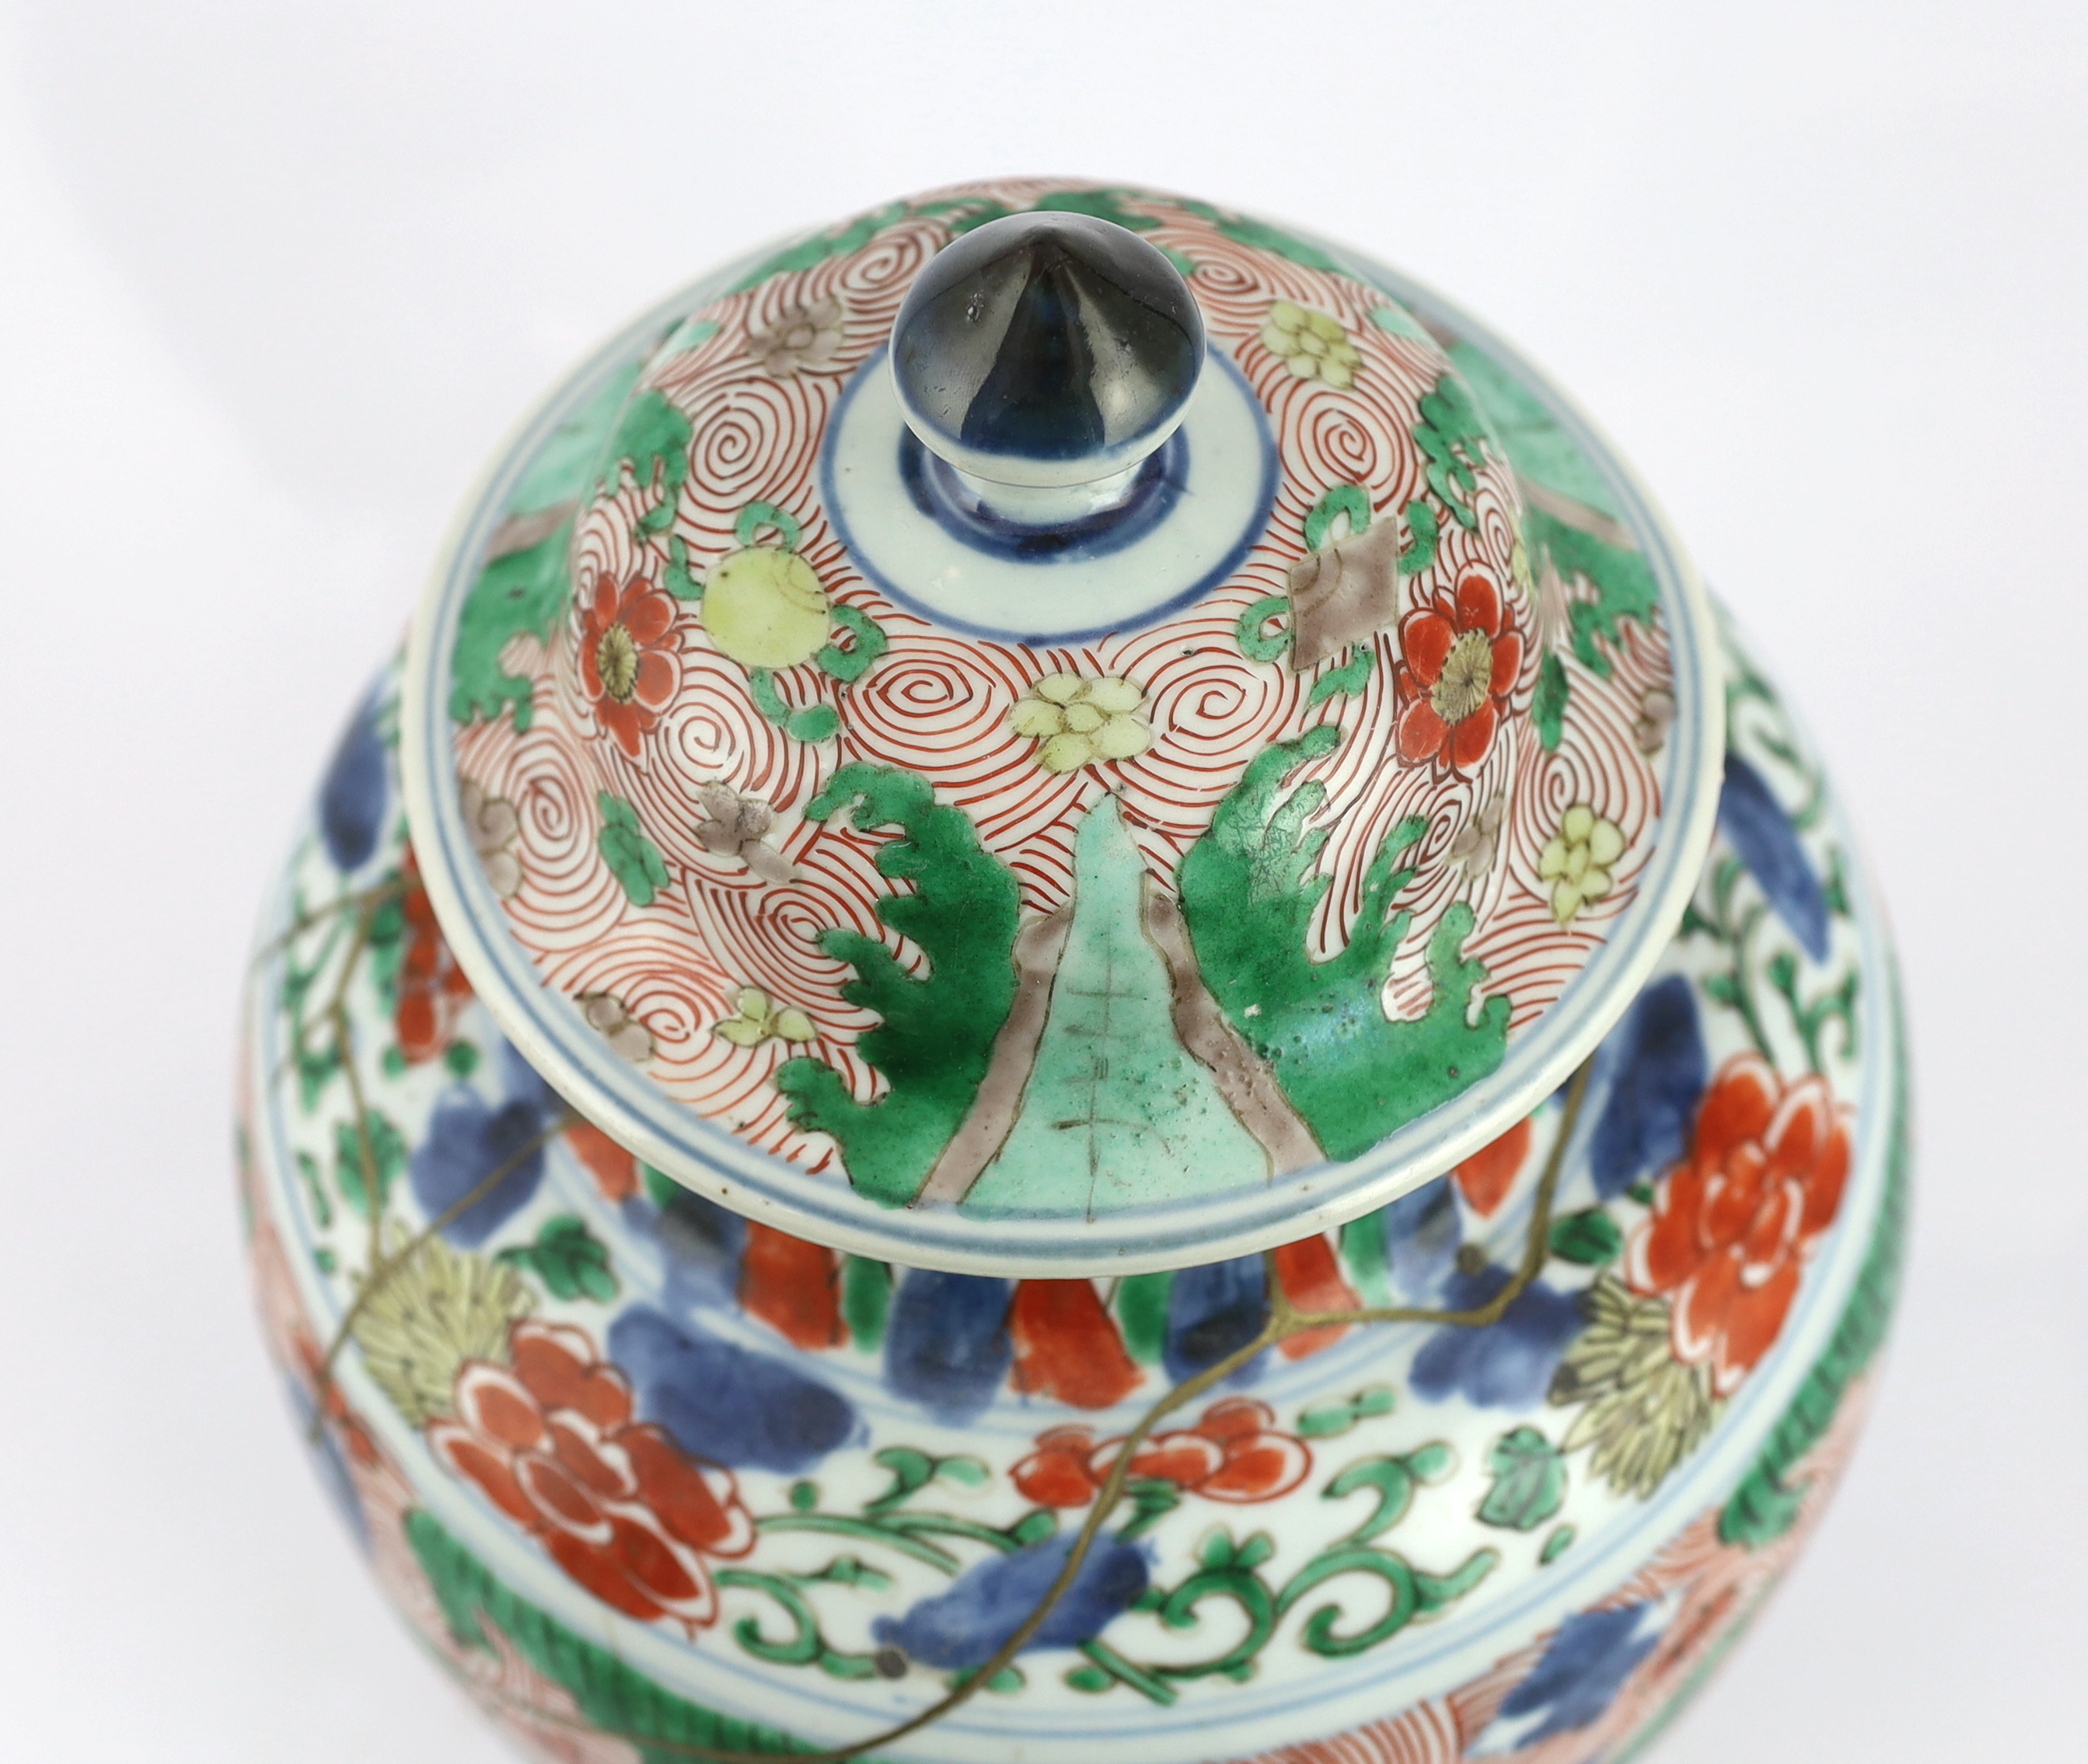 A Chinese wucai ovoid vase and cover, Transitional, Shunzhi period, broken with kintsugi style repair